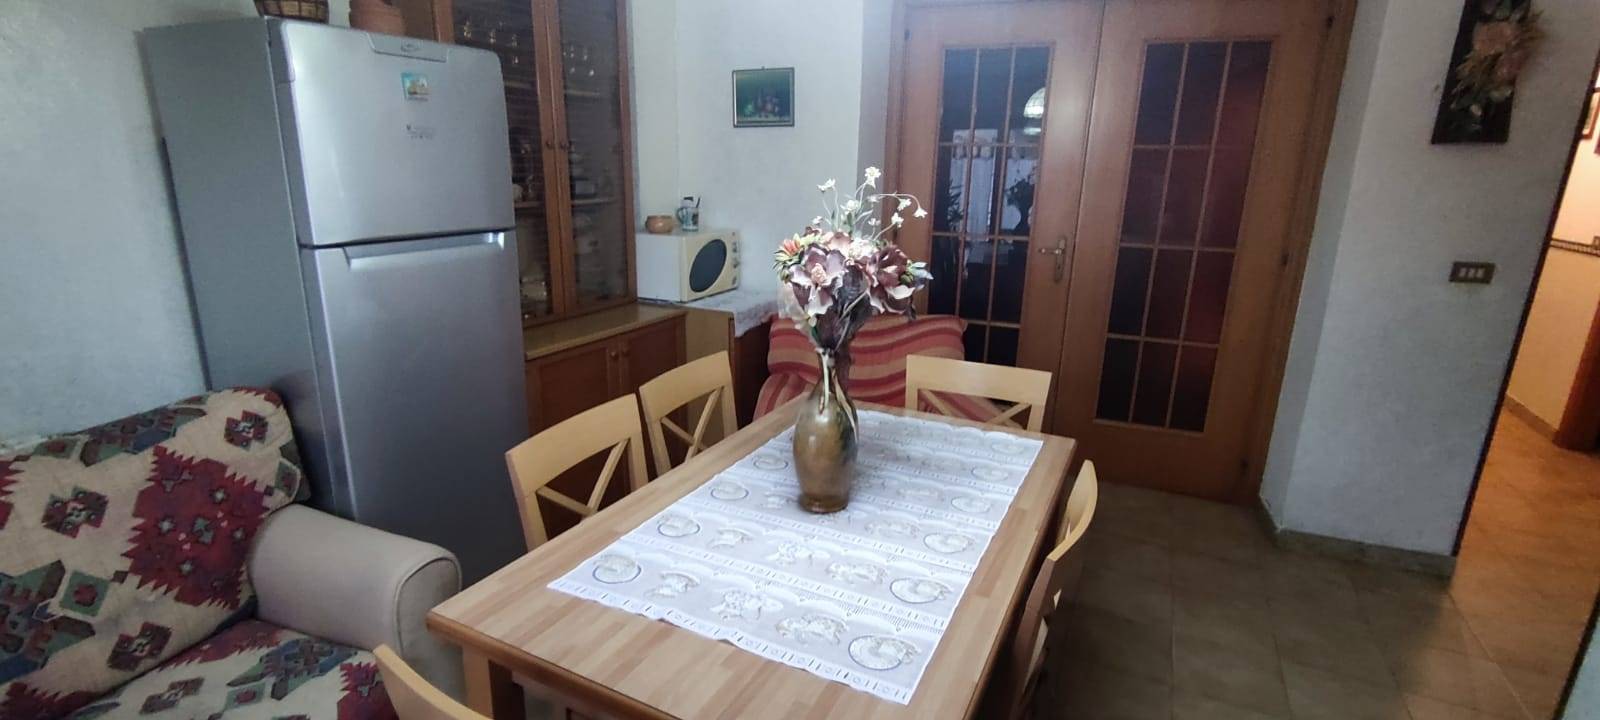 CENTRO STORICO - ZONA MARGINALE, ENNA, Apartment for sale of 98 Sq. mt., Good condition, Heating Individual heating system, placed at 2°, composed 